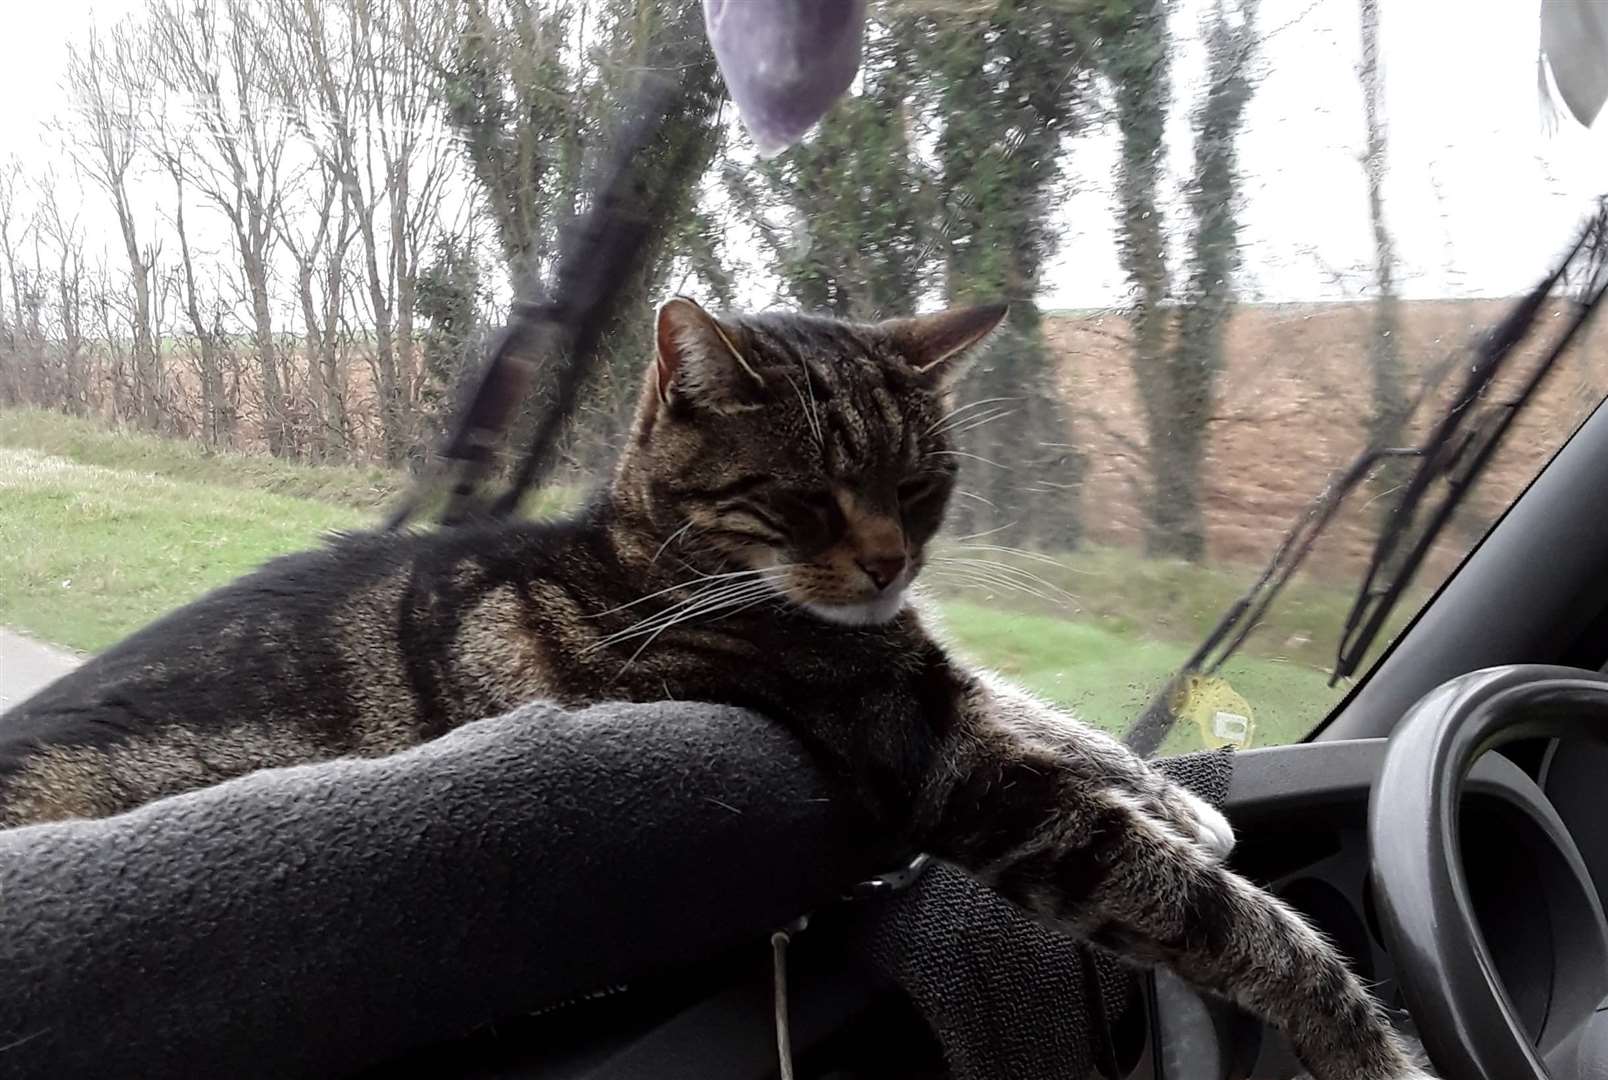 One of Julie's cats that lives with her in the van